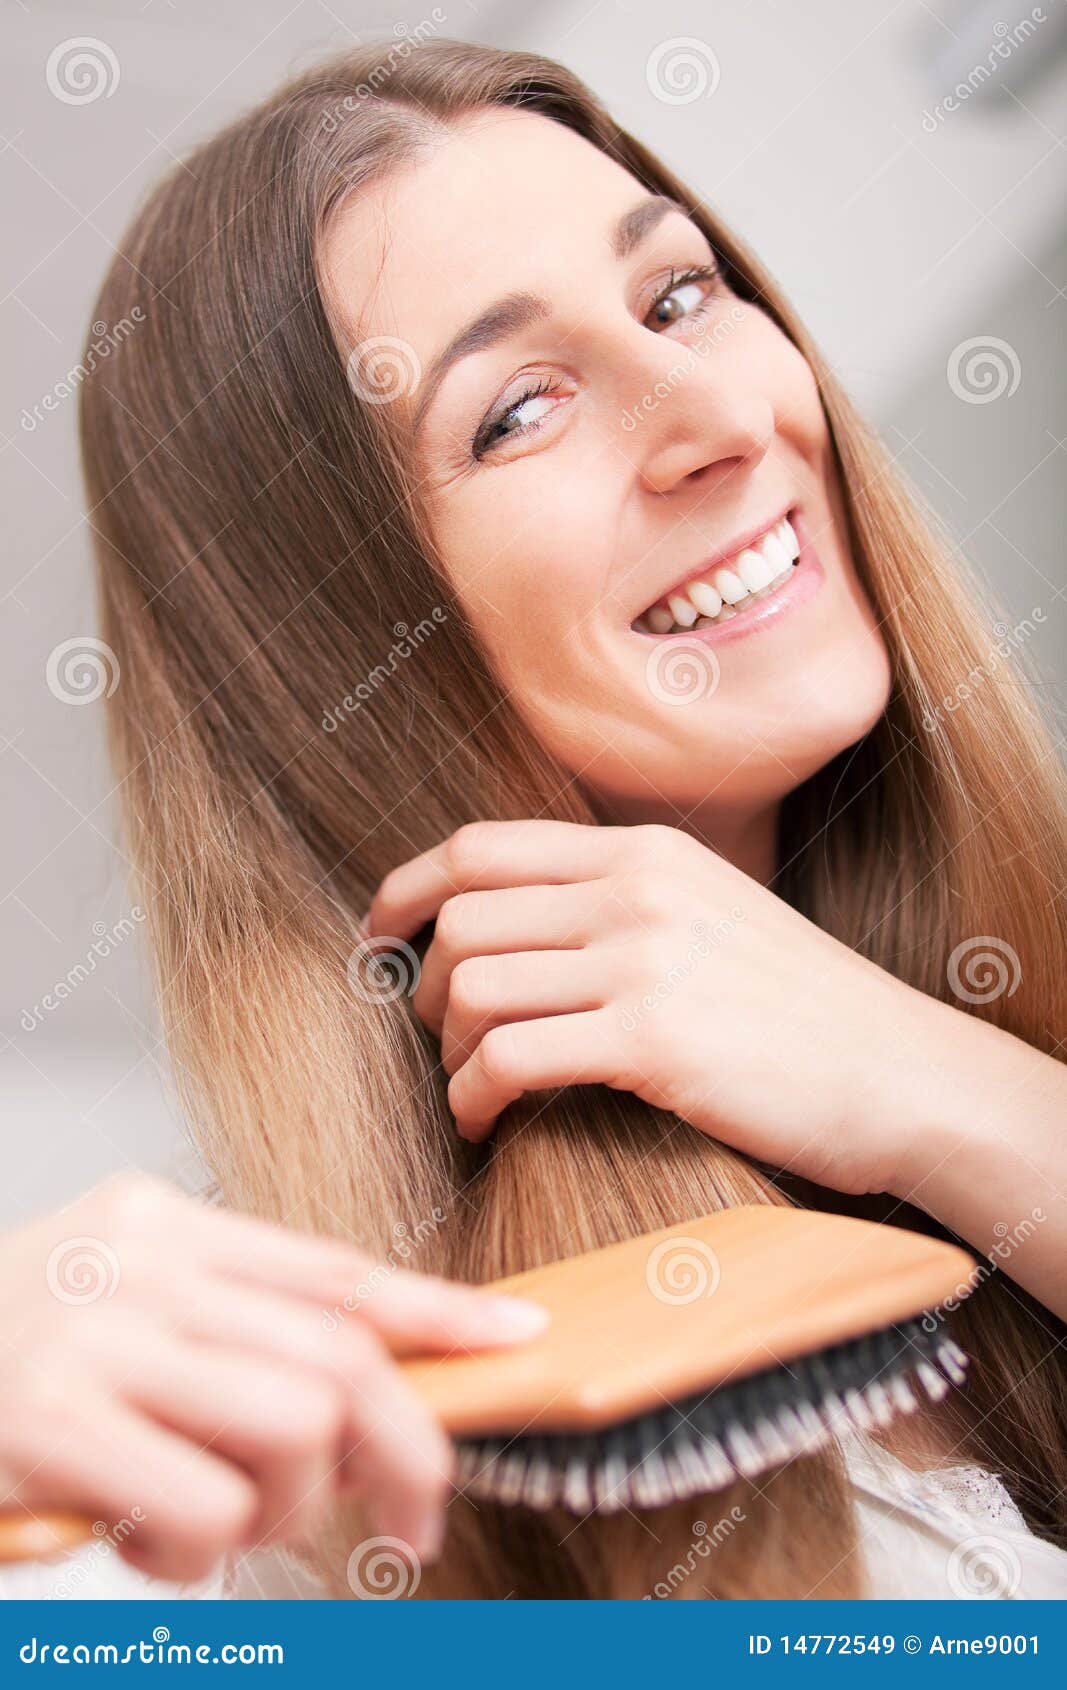 Young Woman Brushing Her Hair St